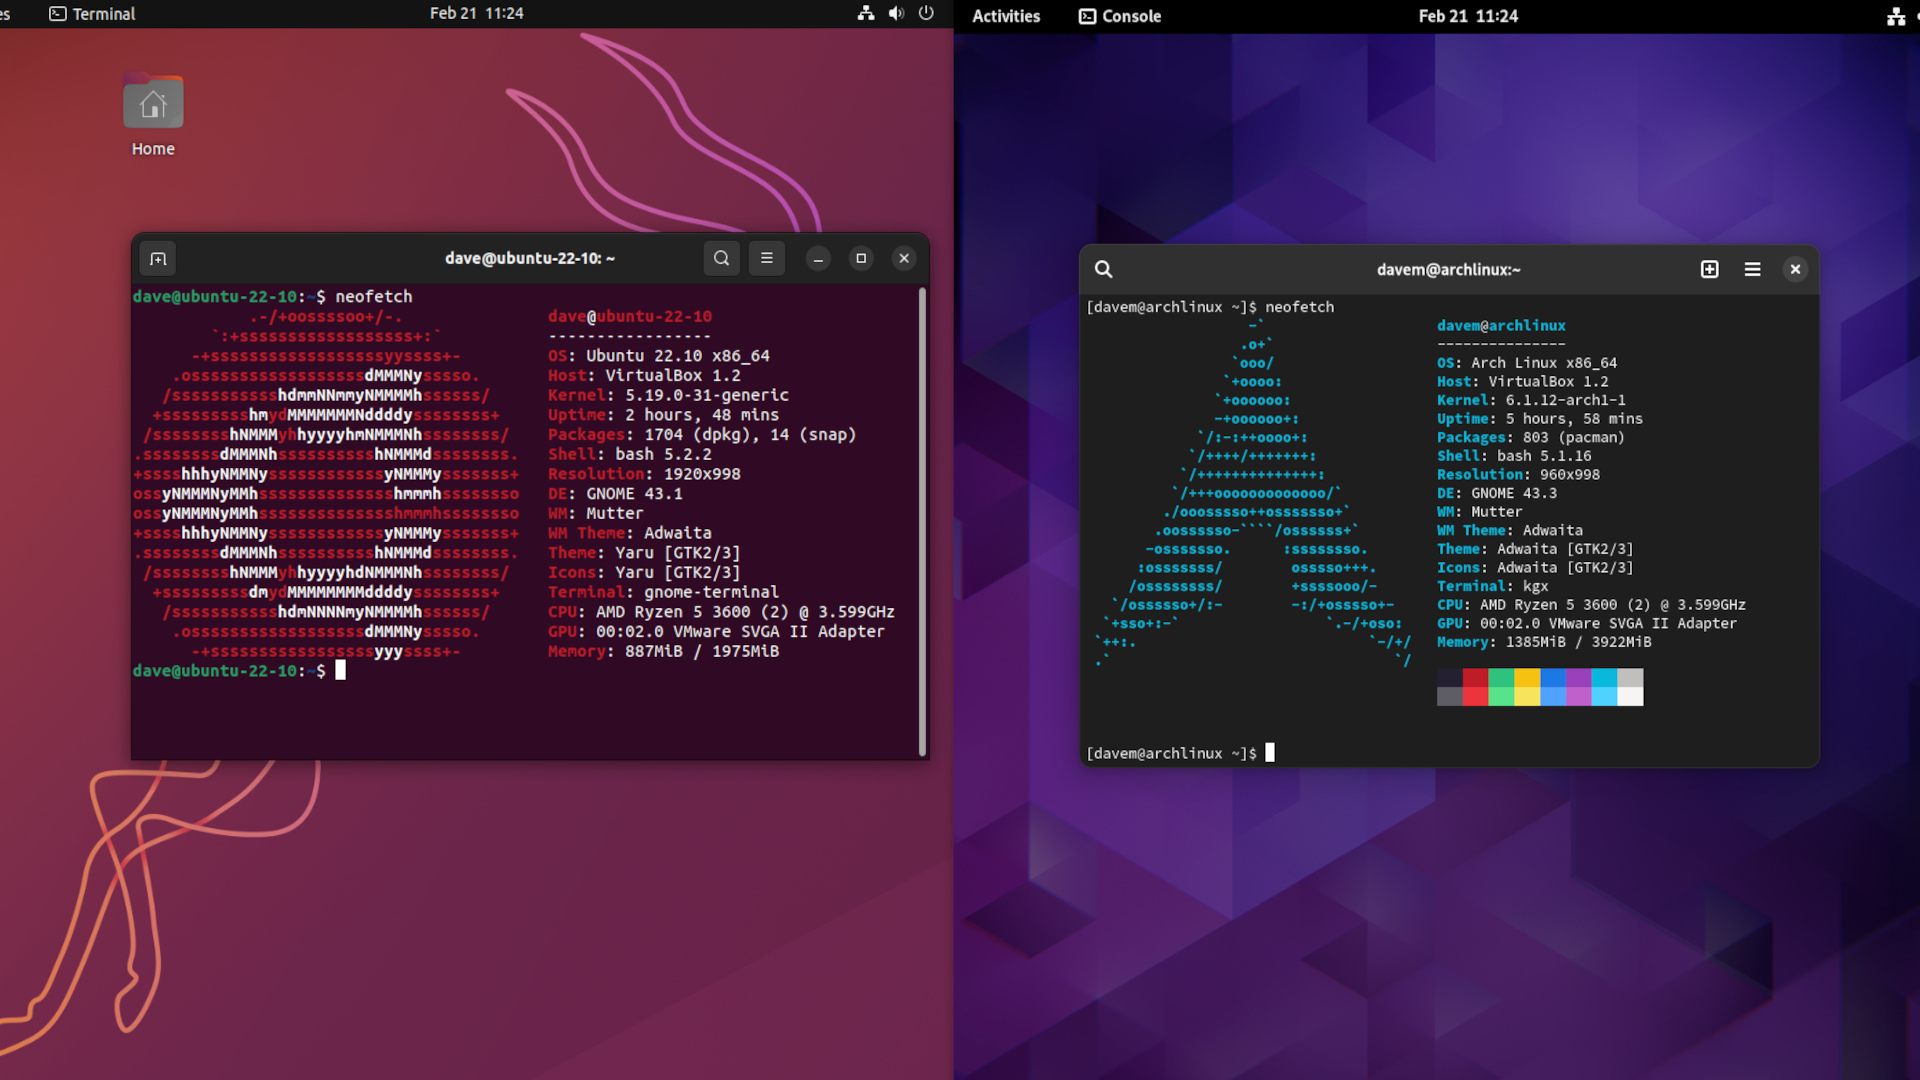 Ubuntu and Arch Linux GNOME desktops, side by side